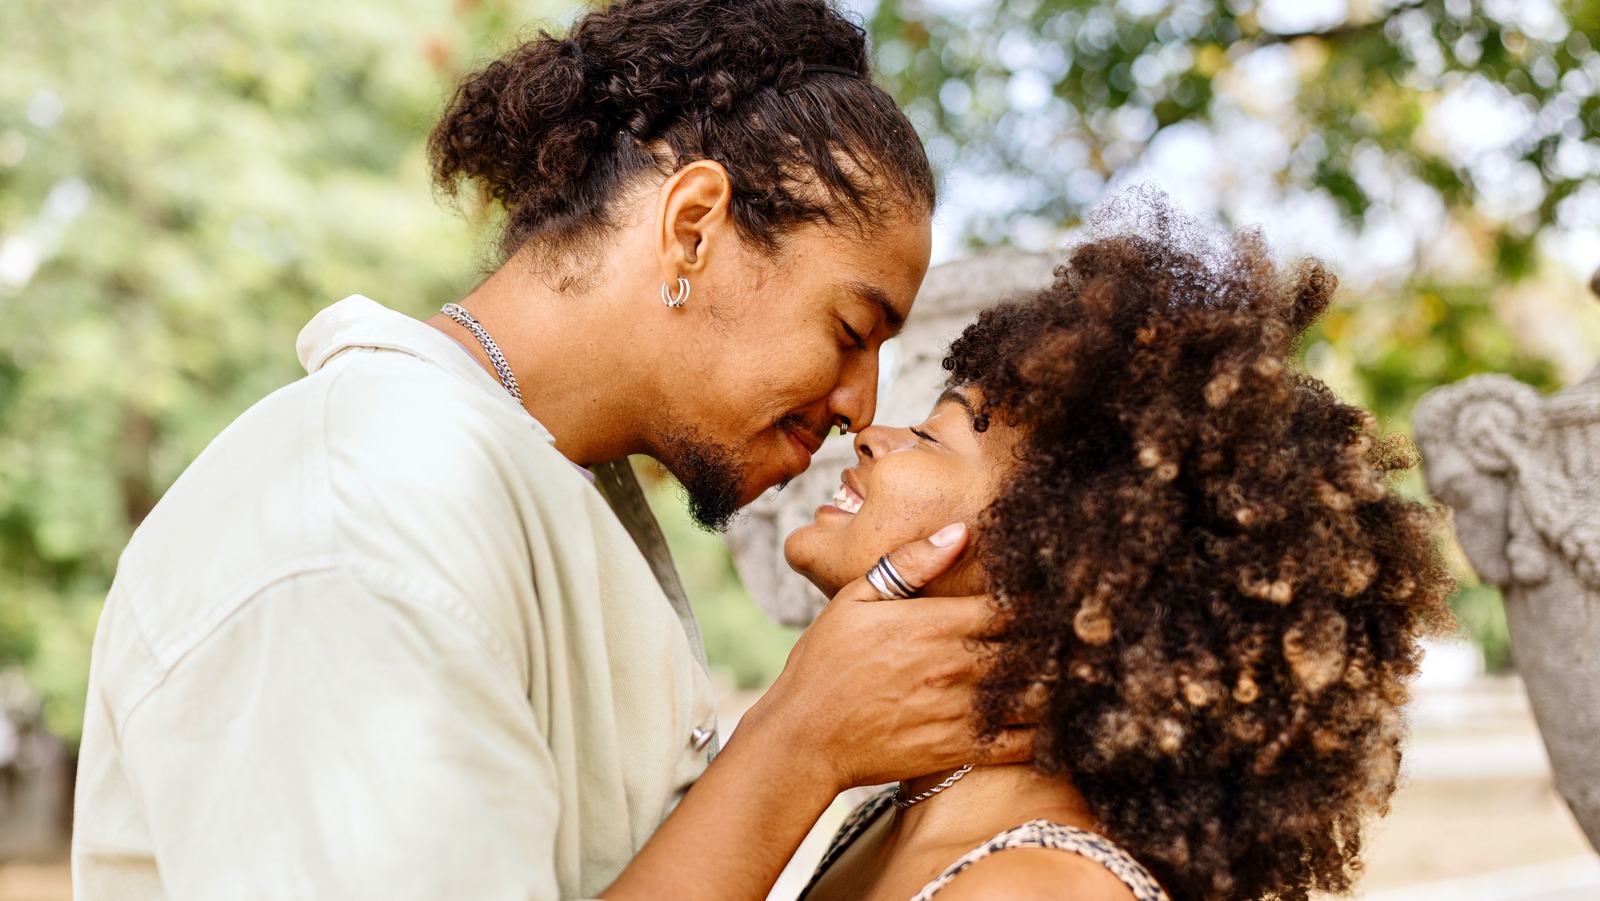 Being In Love Has An Unexpected Effect On Your Memory